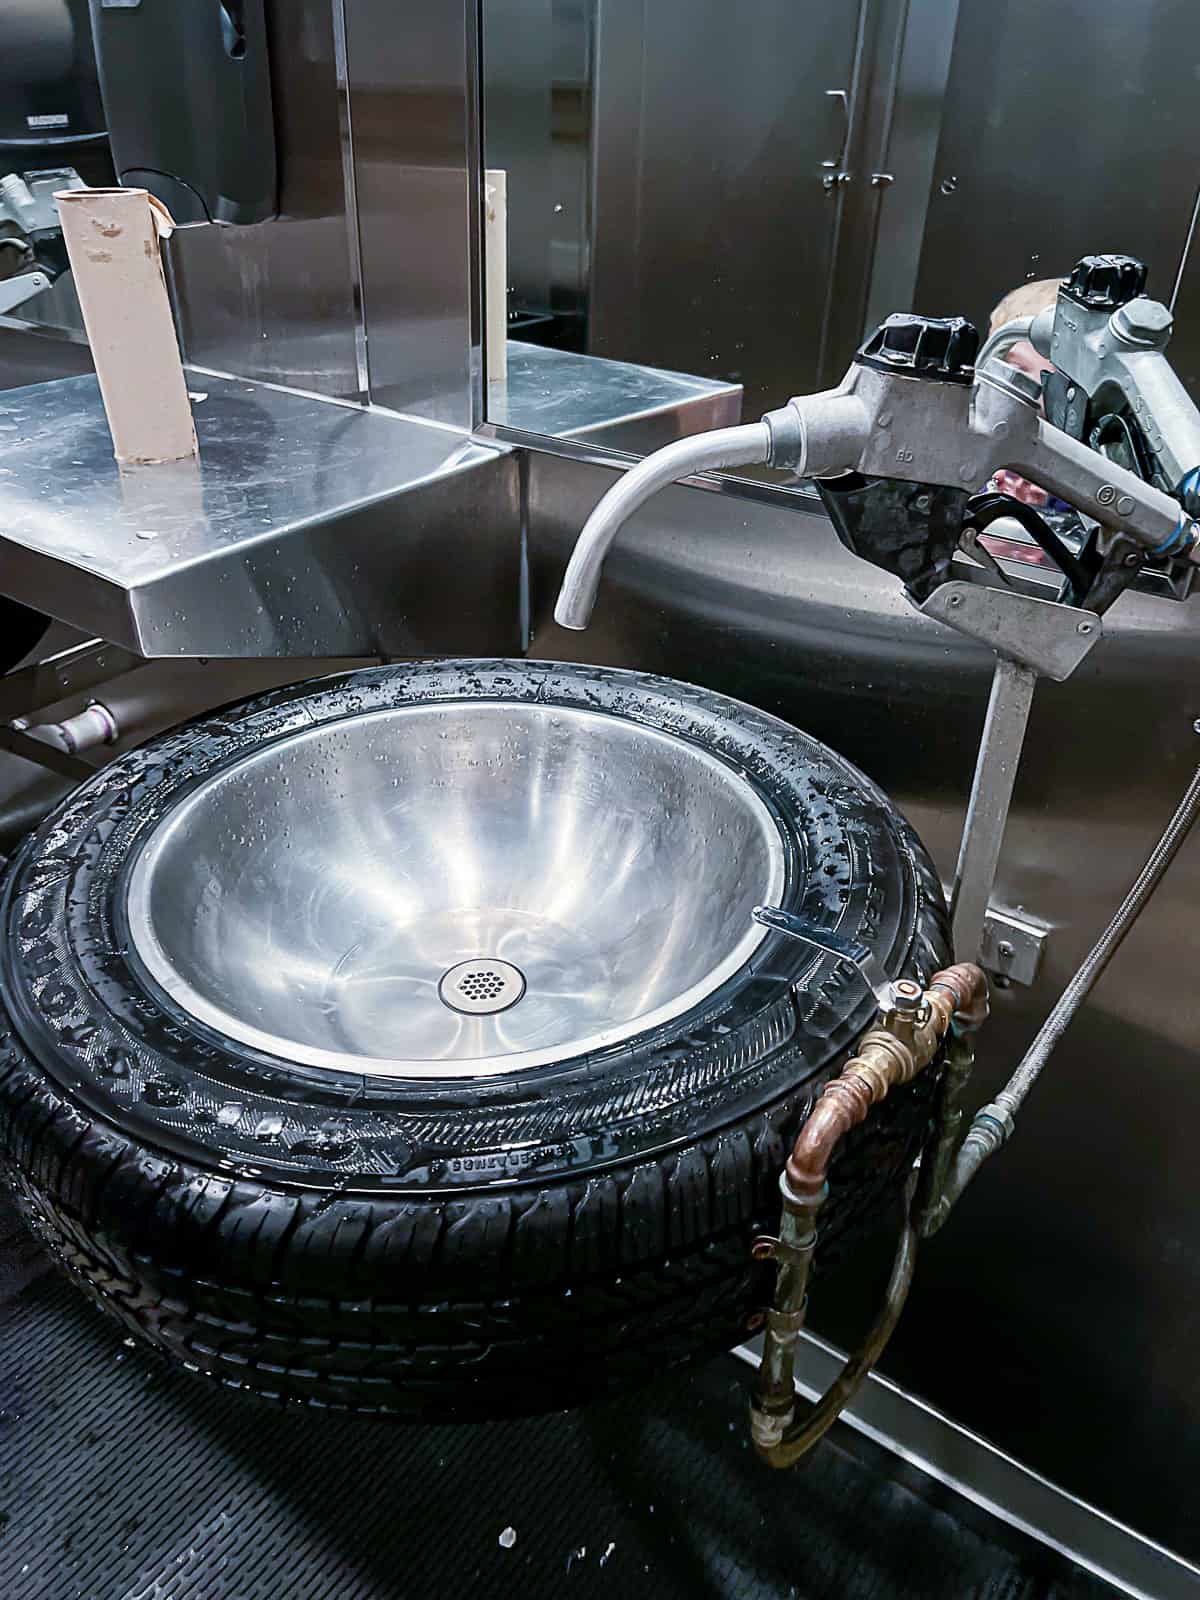 Bathroom sink made out of tires and a gas pump at Fords Garage Restaurant in Plano Texas